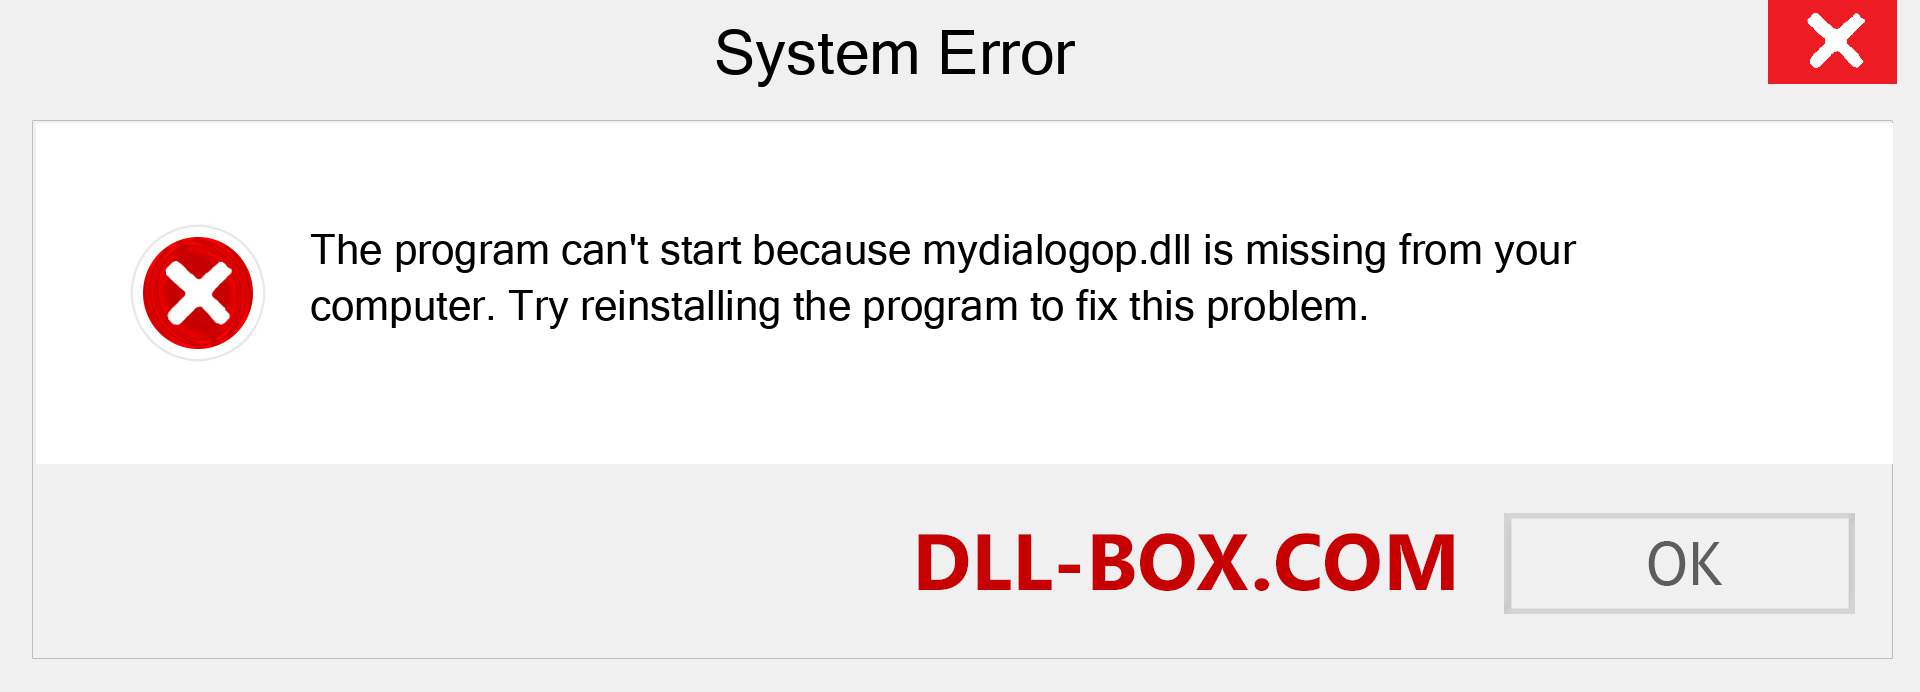  mydialogop.dll file is missing?. Download for Windows 7, 8, 10 - Fix  mydialogop dll Missing Error on Windows, photos, images